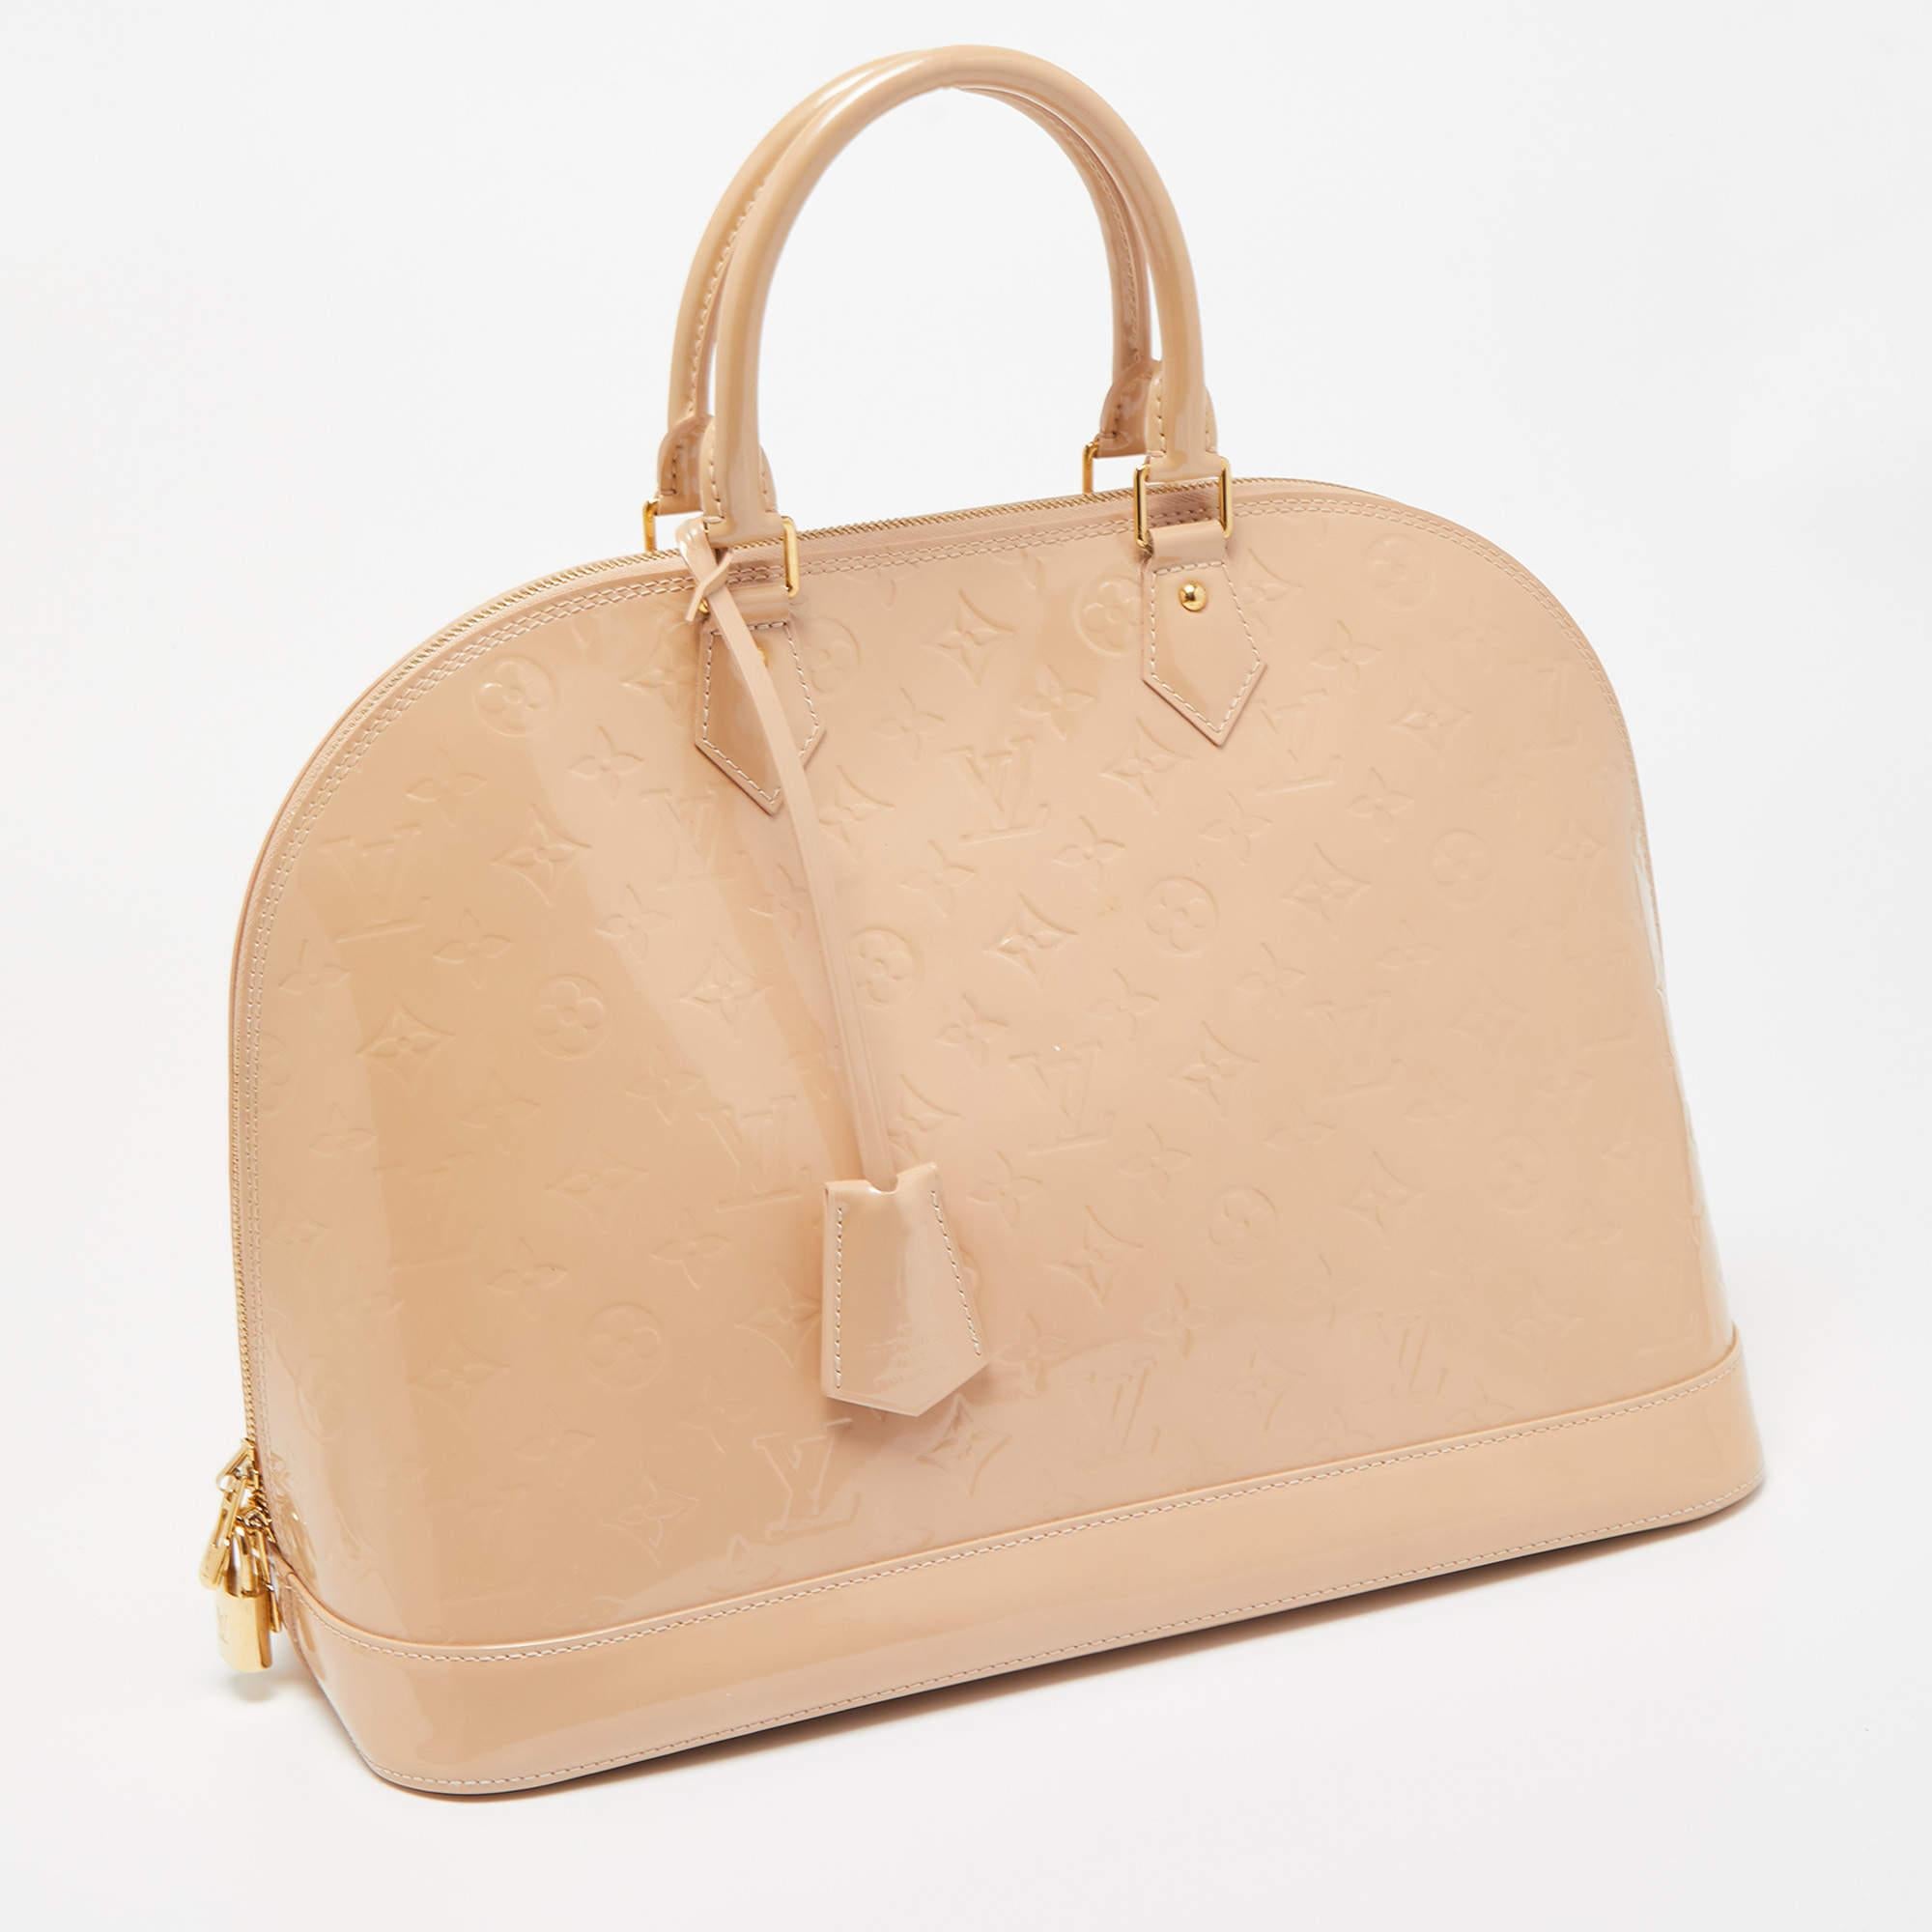 The Louis Vuitton Alma bag is an iconic fashion accessory. Crafted from glossy Monogram Vernis patent leather, it features the iconic Alma silhouette with dual top handles, a structured body, and gold-tone hardware. This elegant and timeless handbag